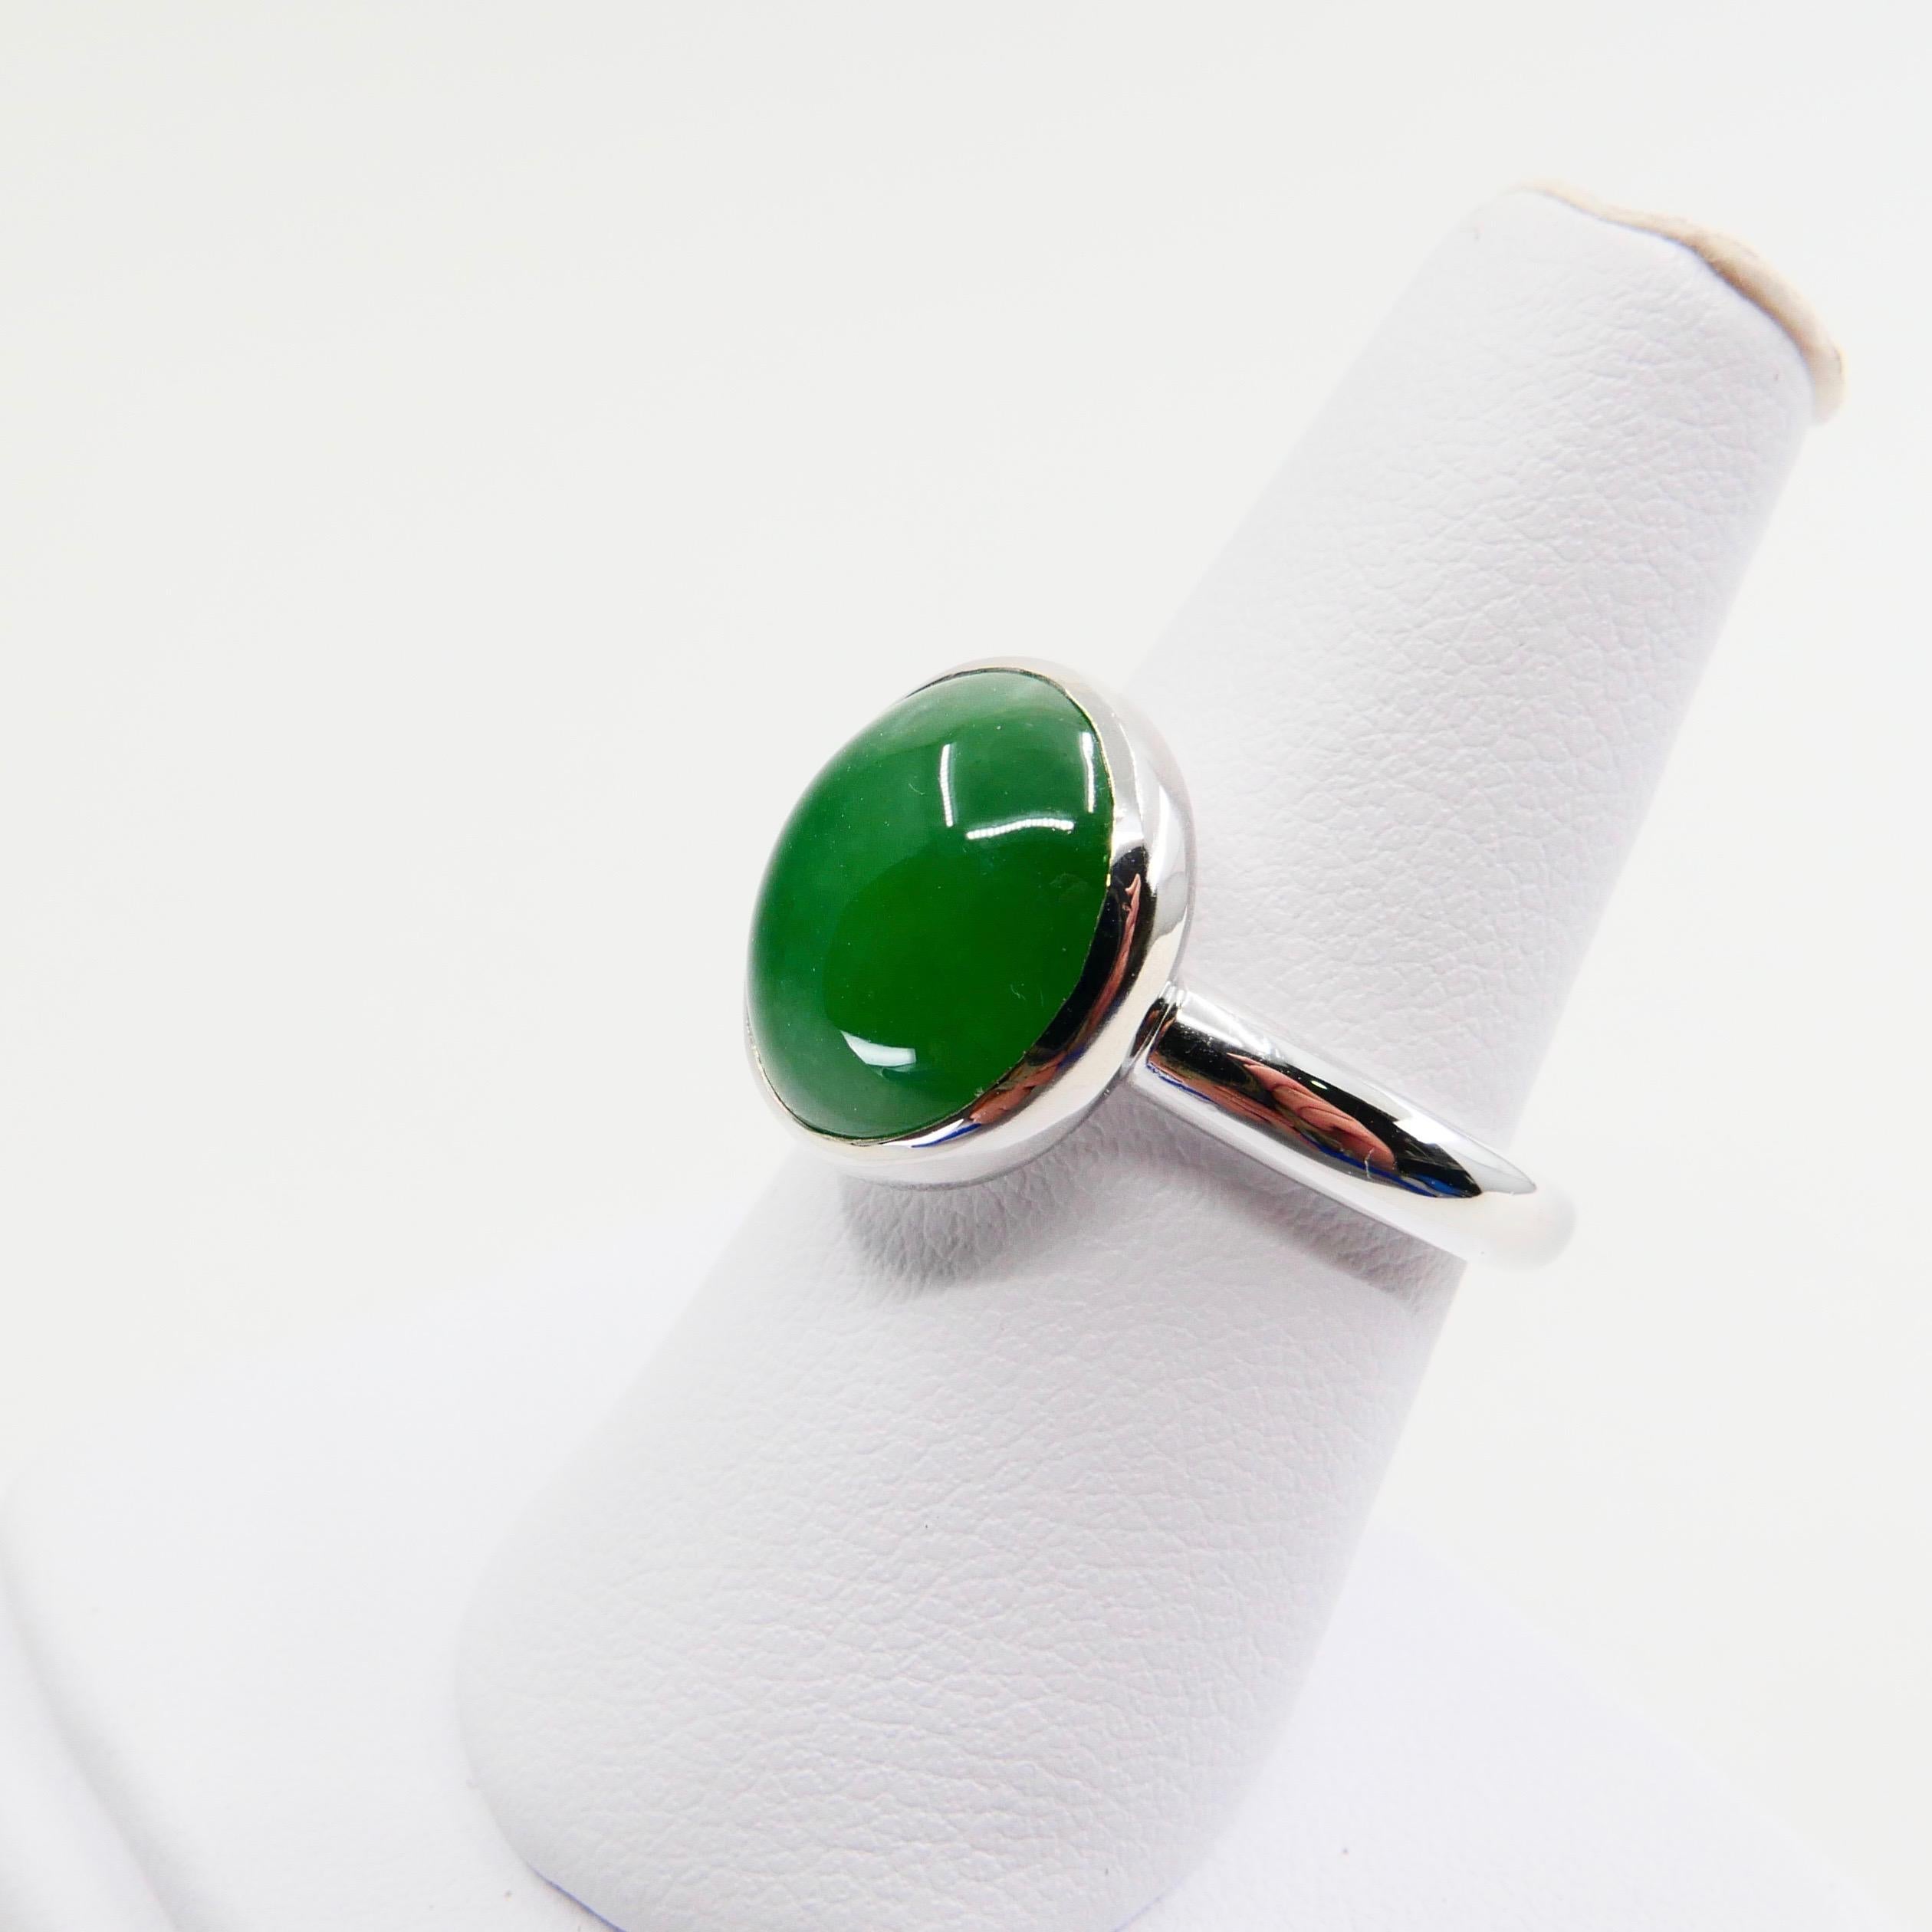 Certified Natural Type A Jadeite Jade Ring, Apple Green Color, Unisex For Sale 5